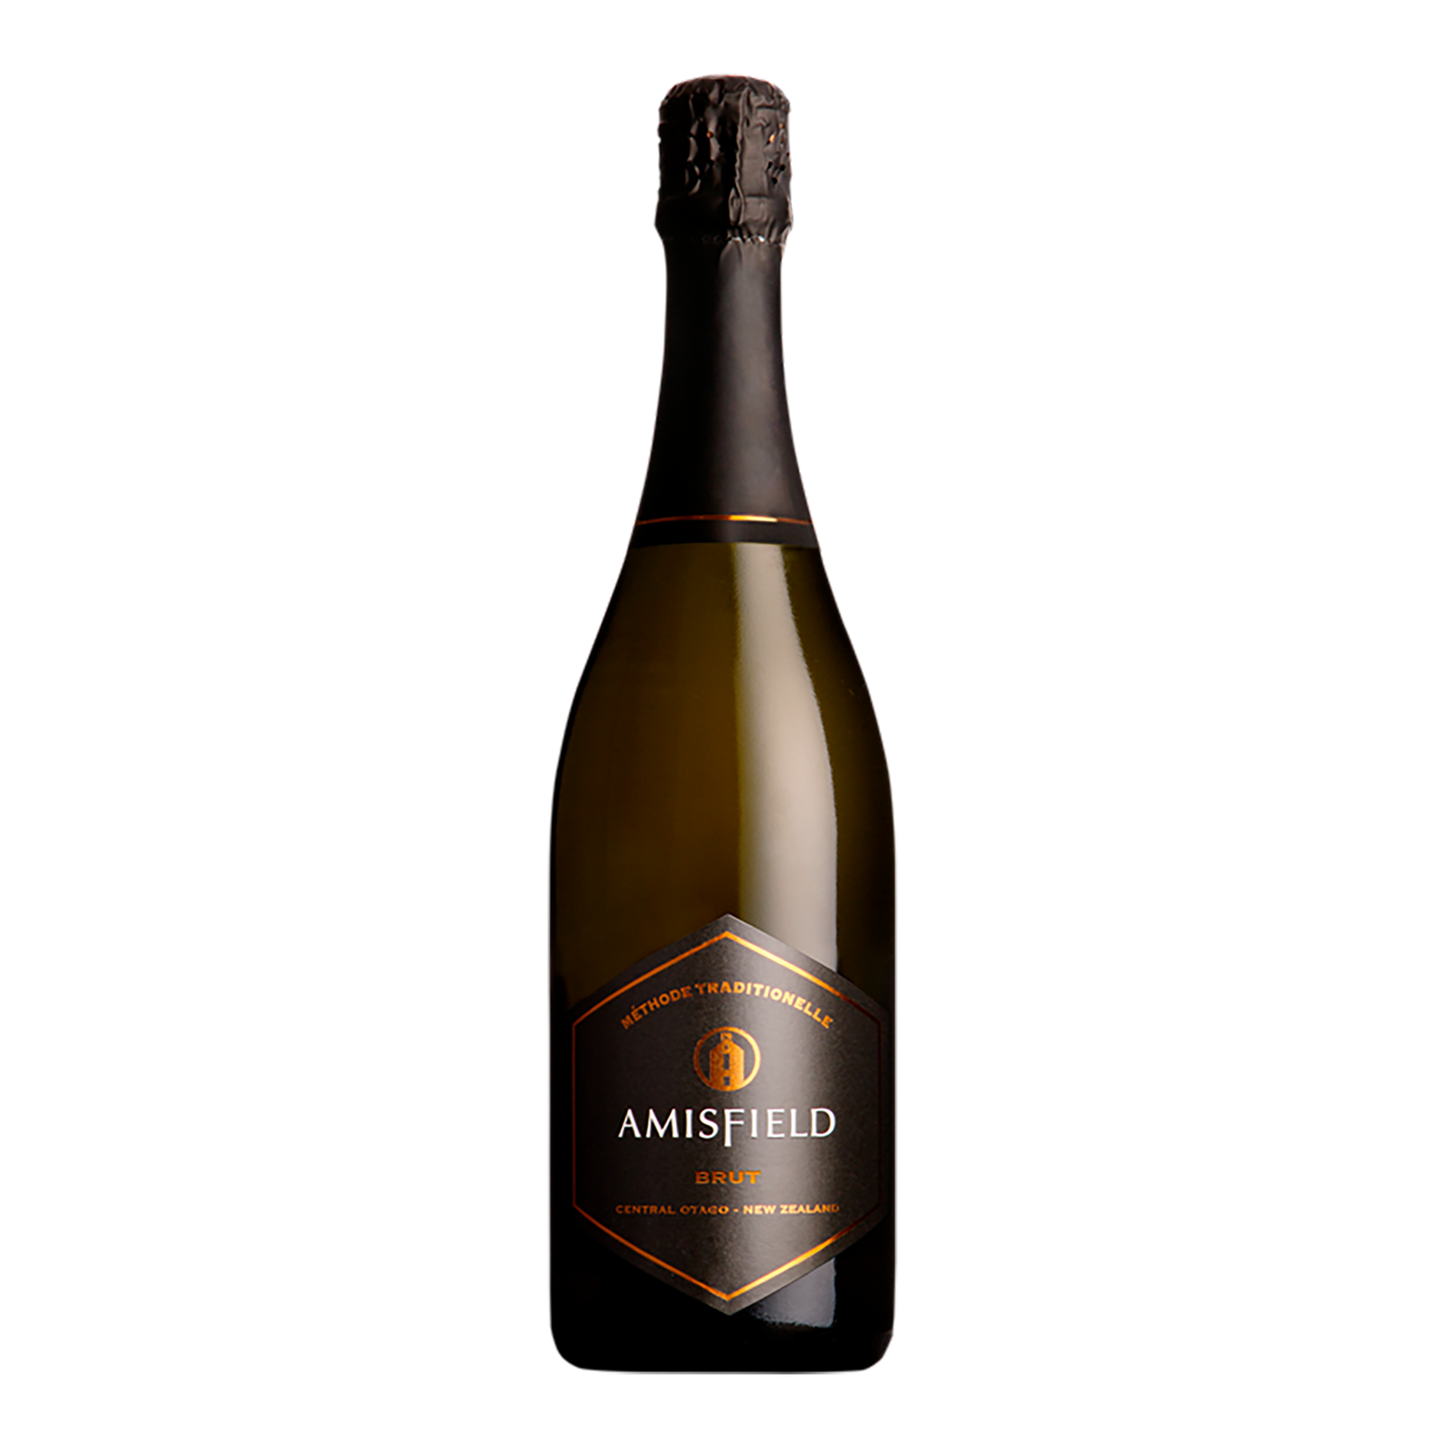 Amisfield Brut Methode Traditionelle 2019